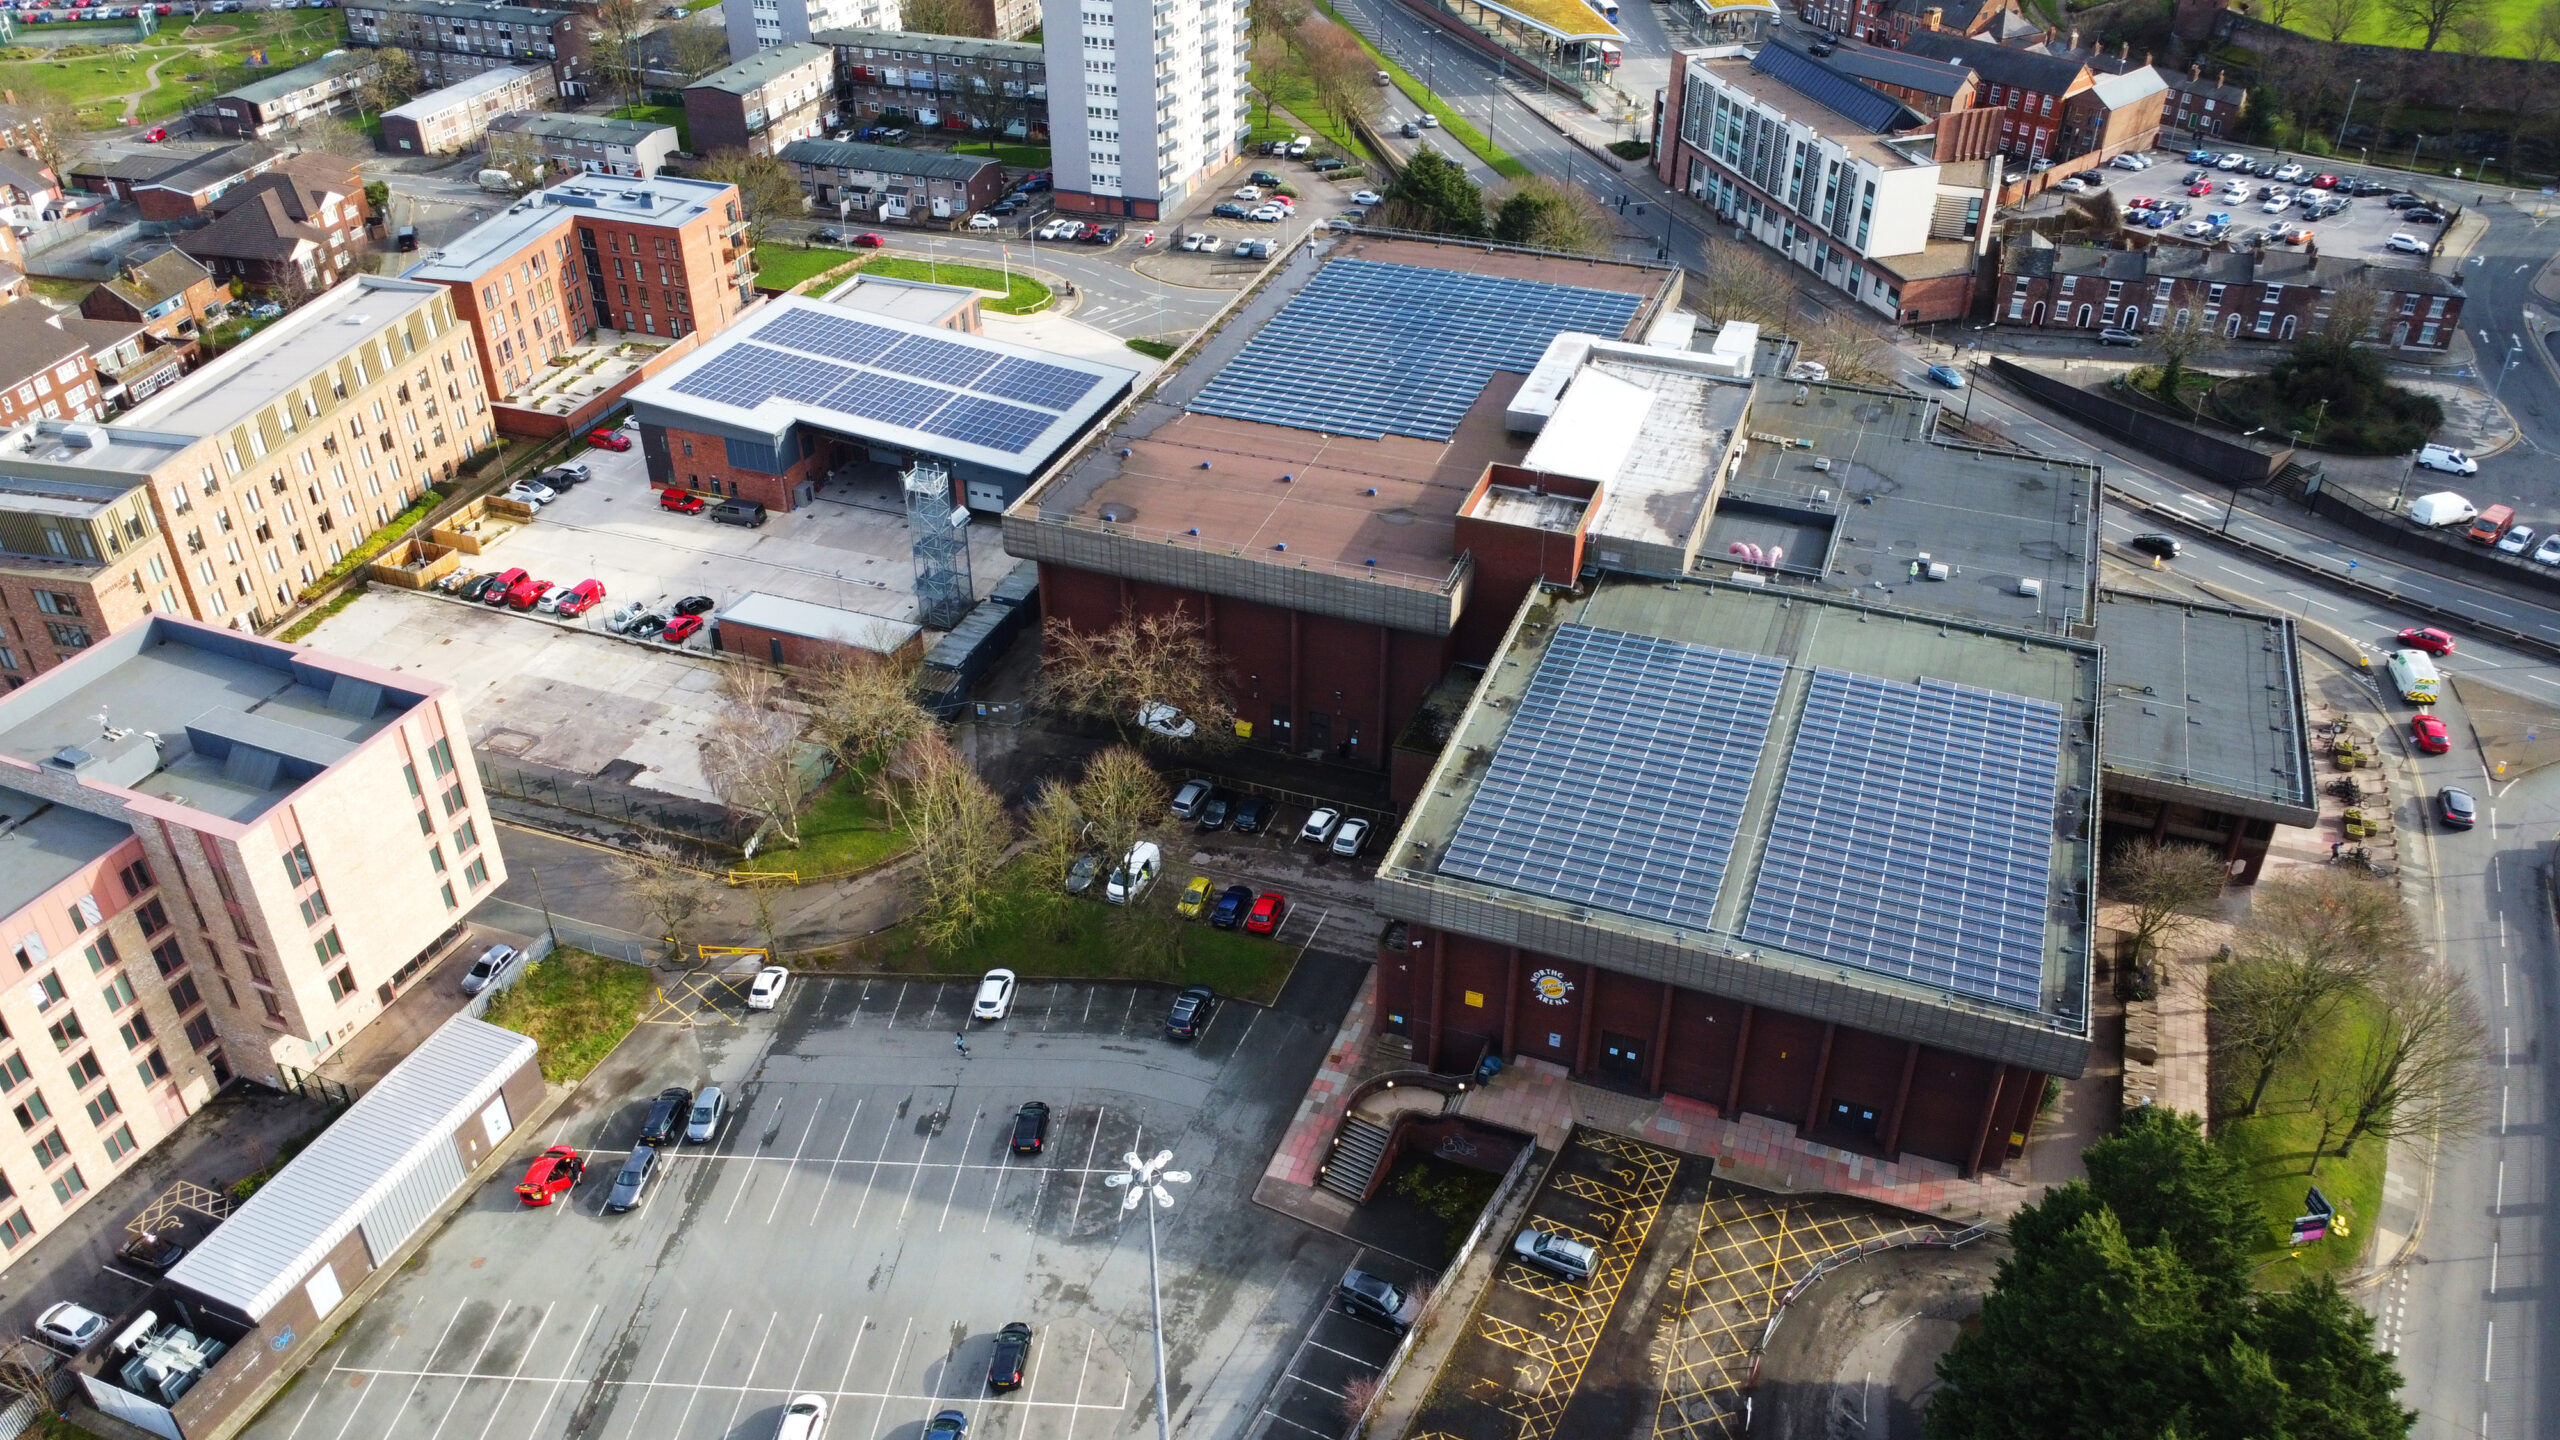 Solar Panels at a Leisure Centre in Chester